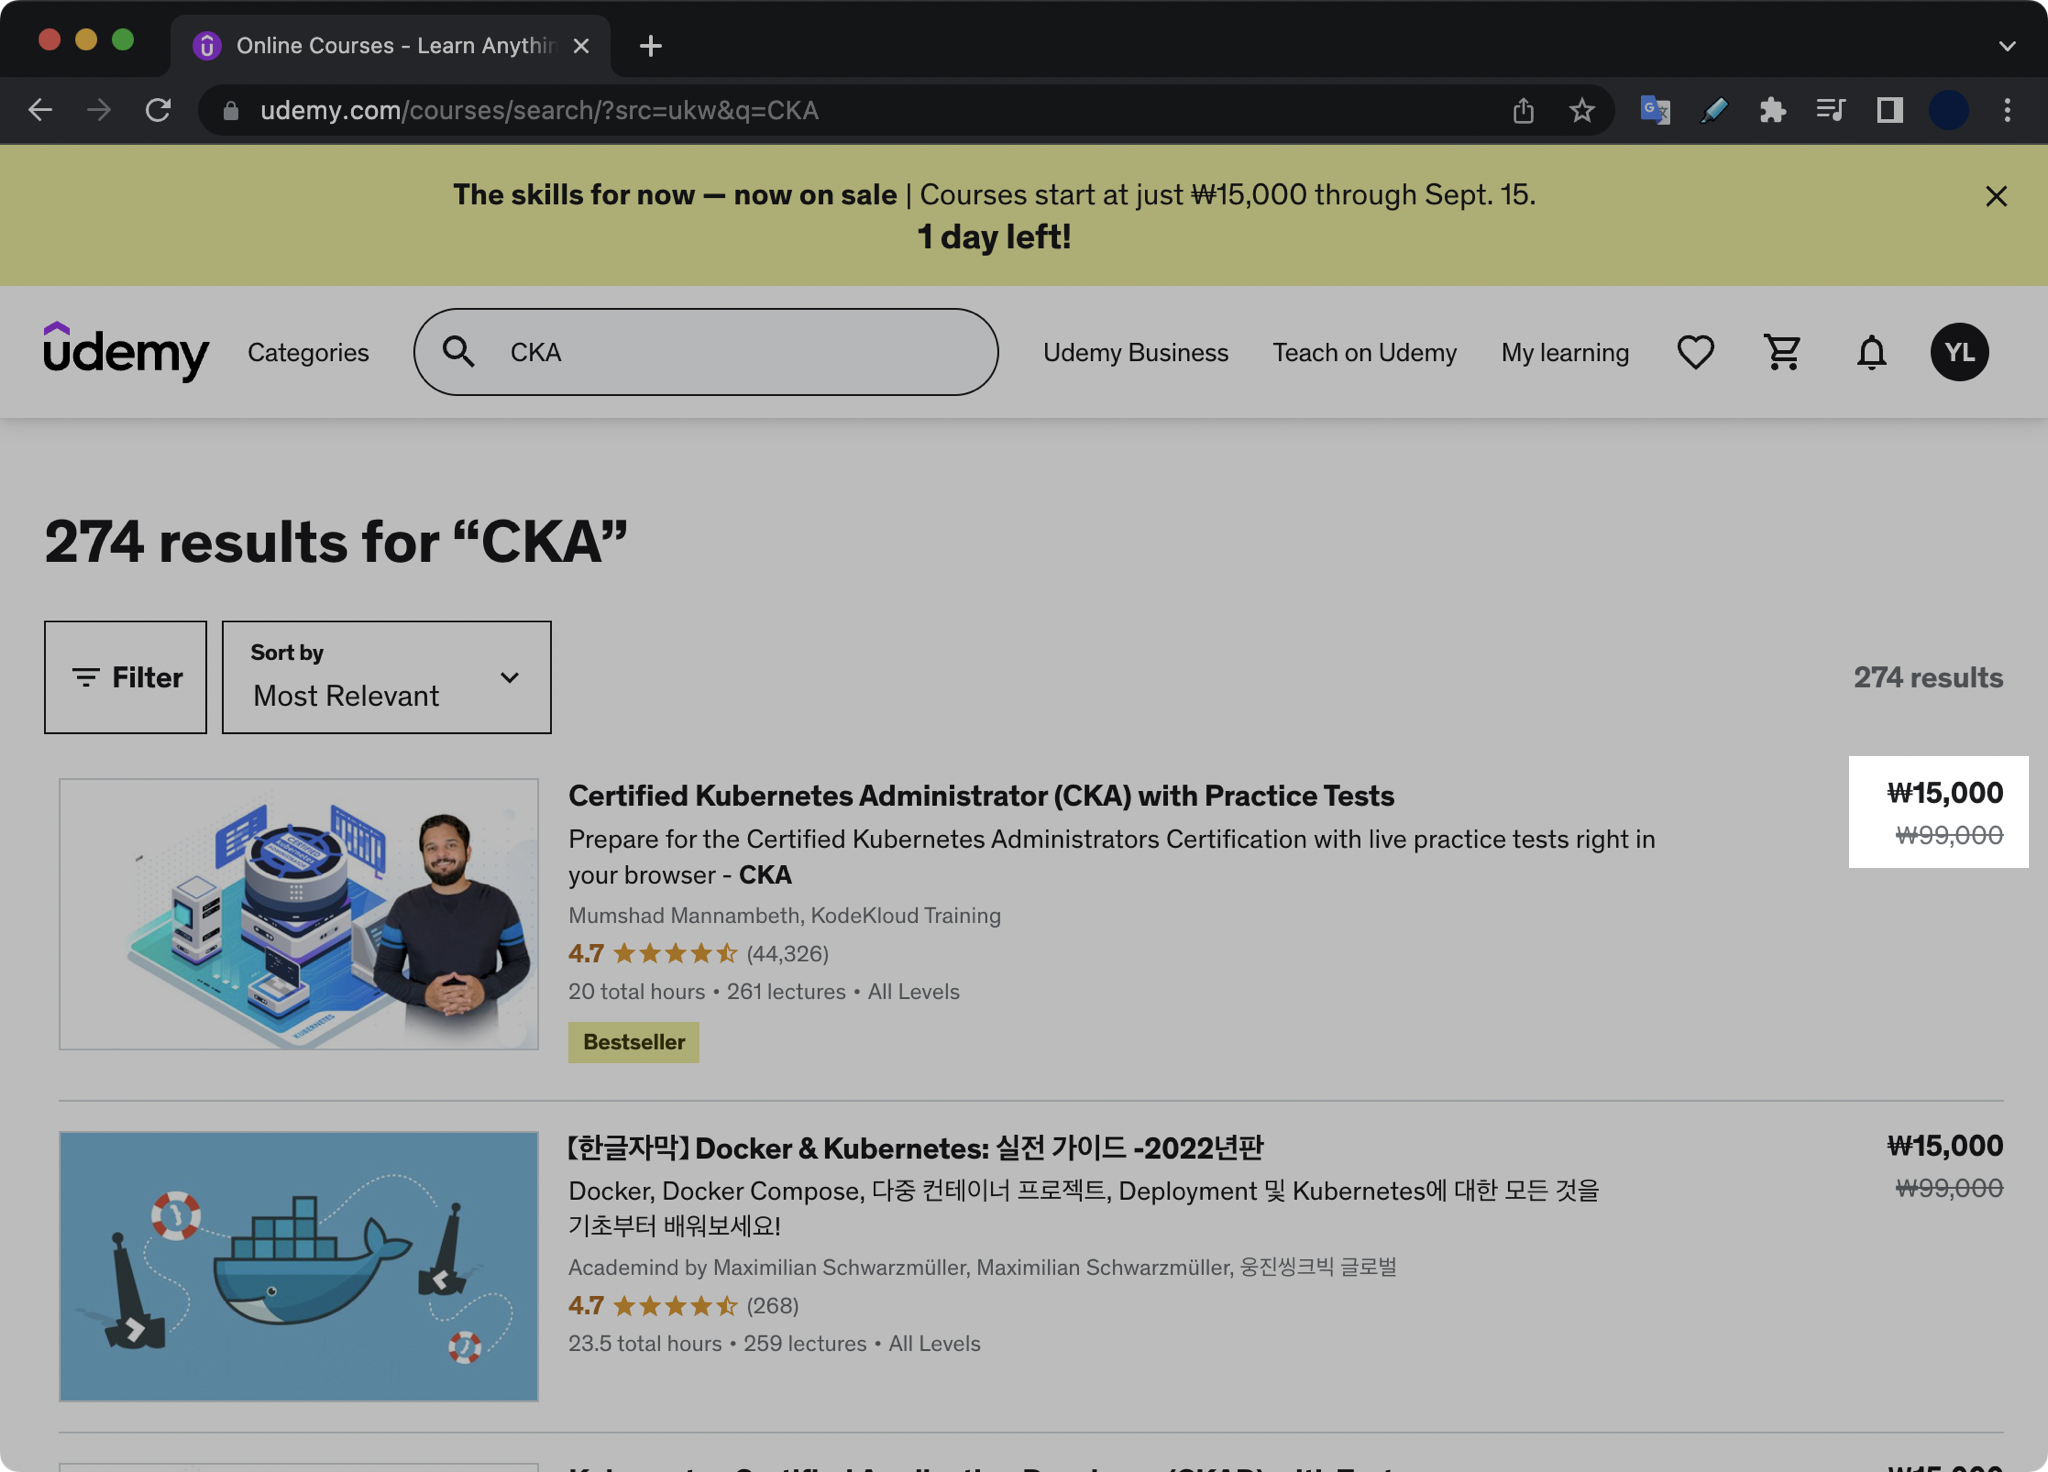 Searching CKA courses on Udemy